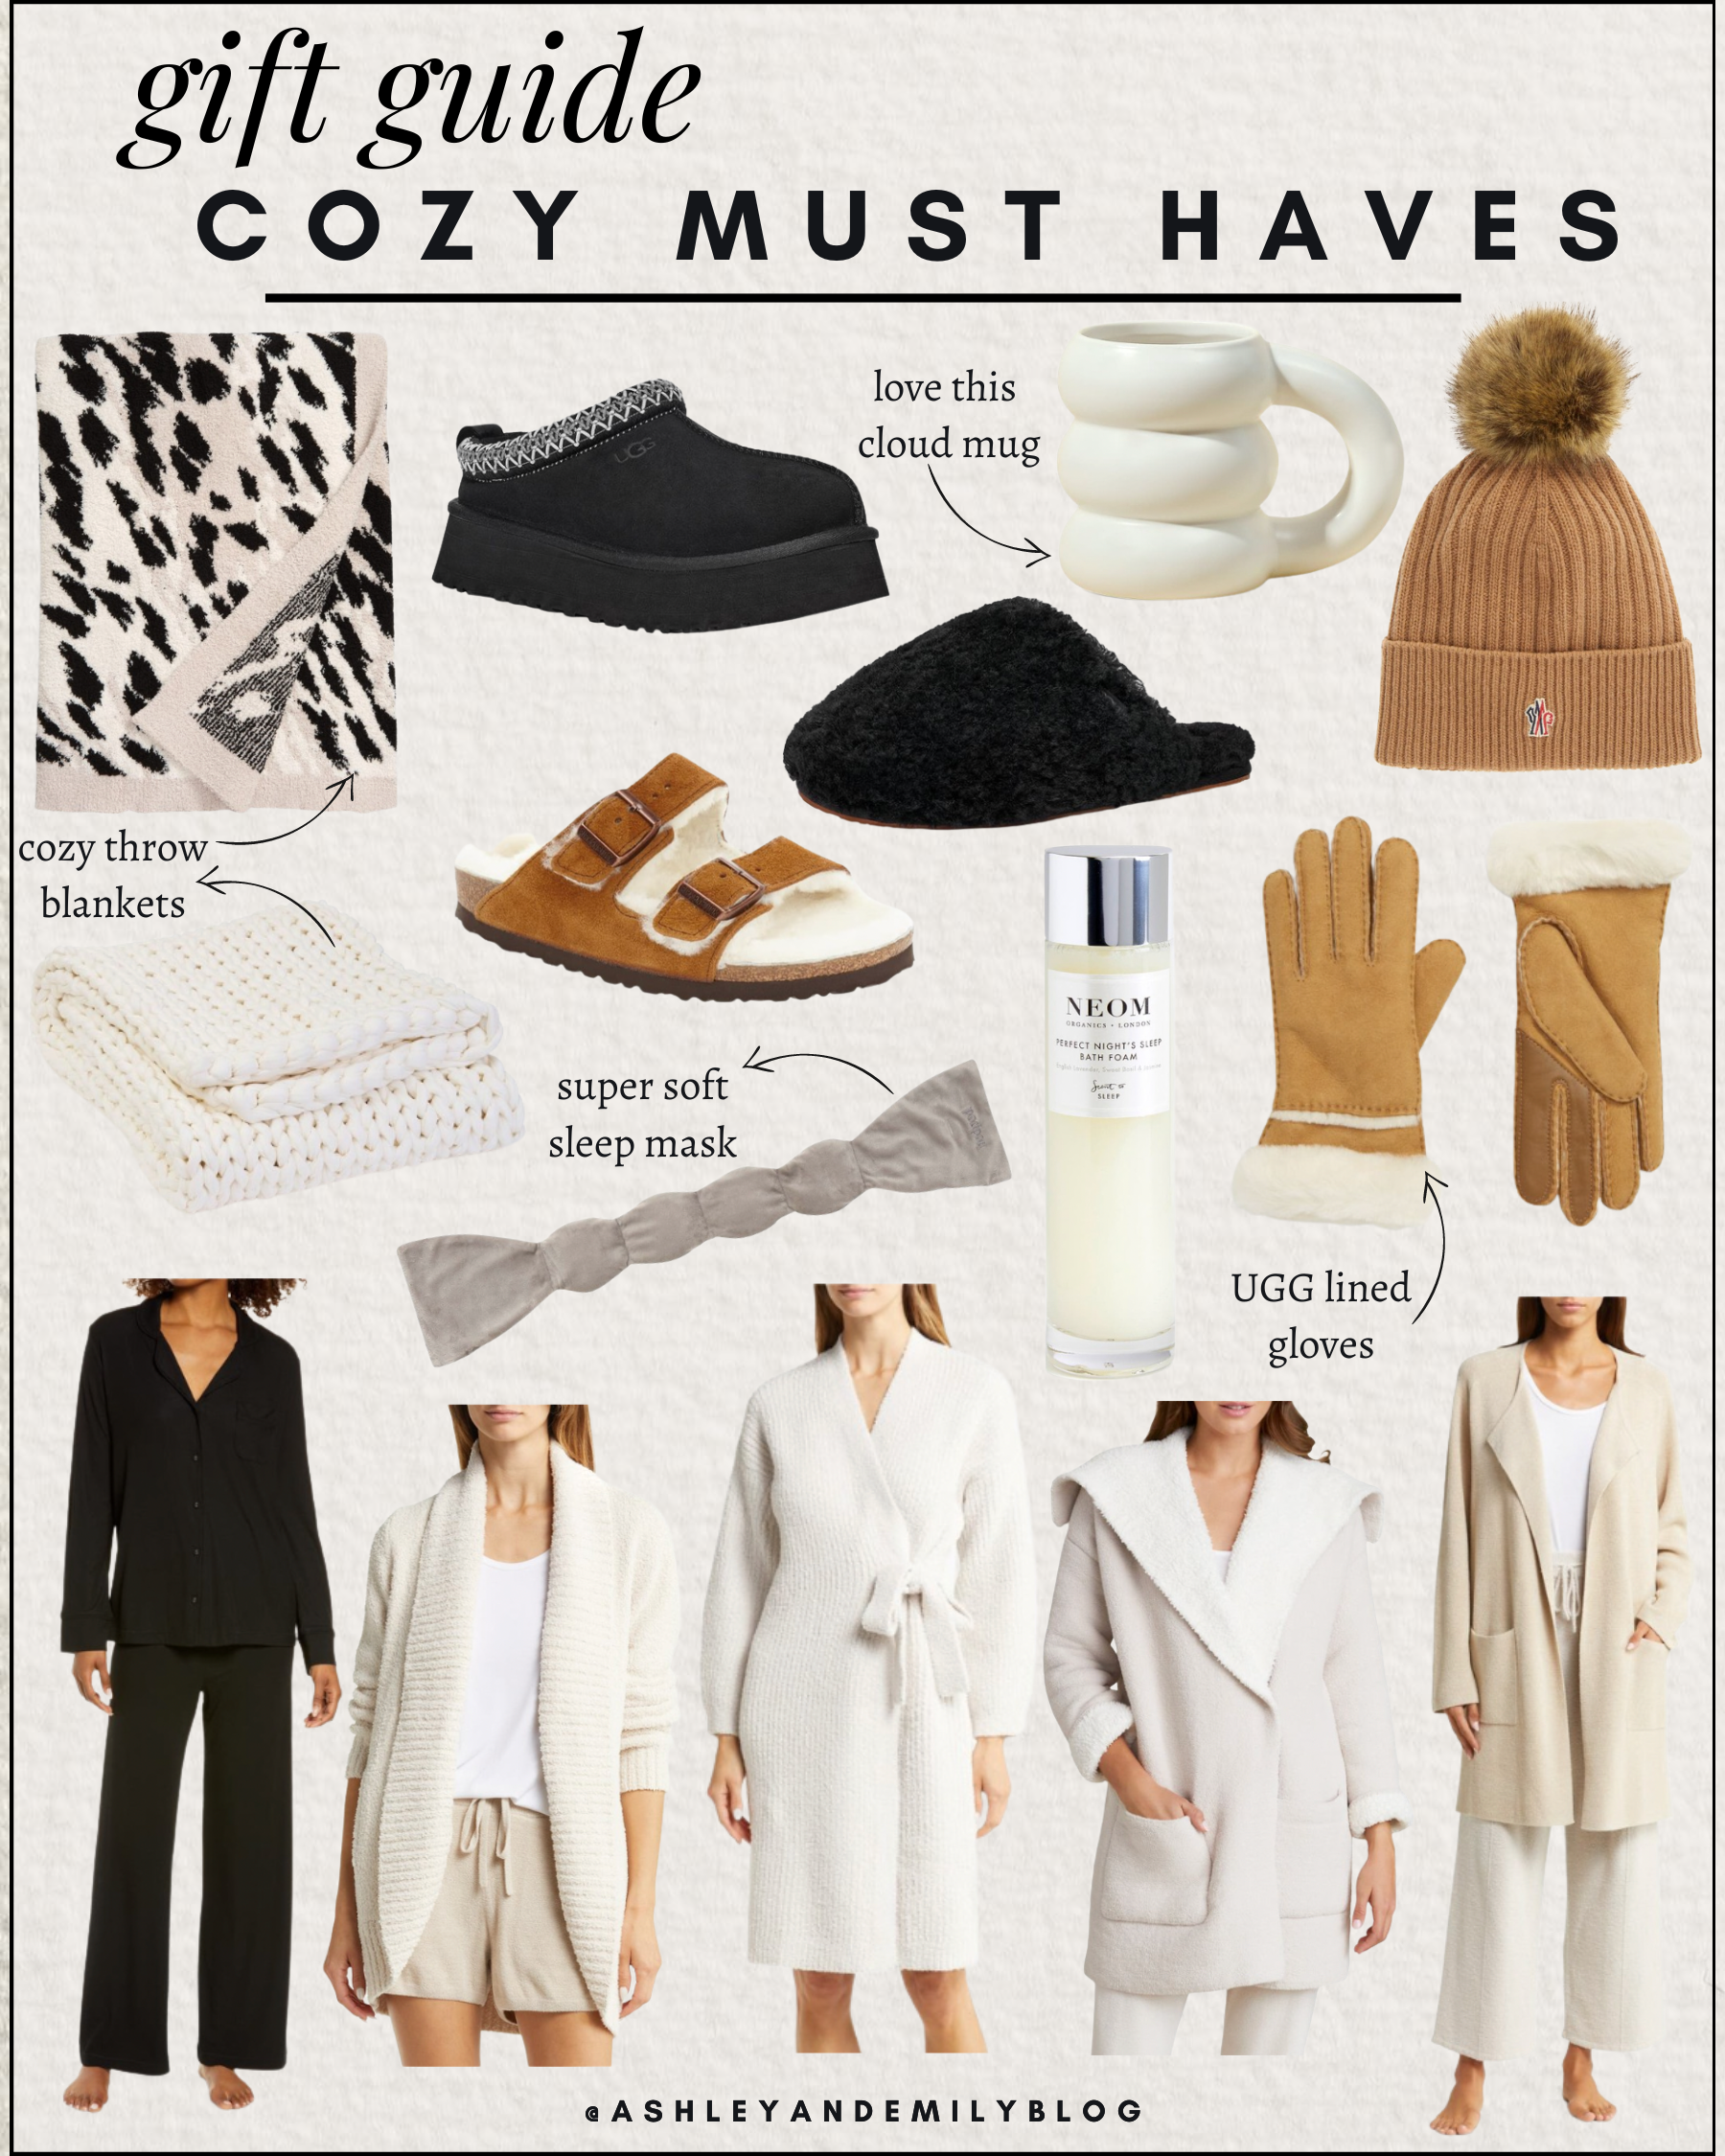 Reno bloggers, Ashley Zeal Hurd and Emily Wieczorek from The Ashley & Emily Blog share all their picks for their 2022 Gift Guide. 